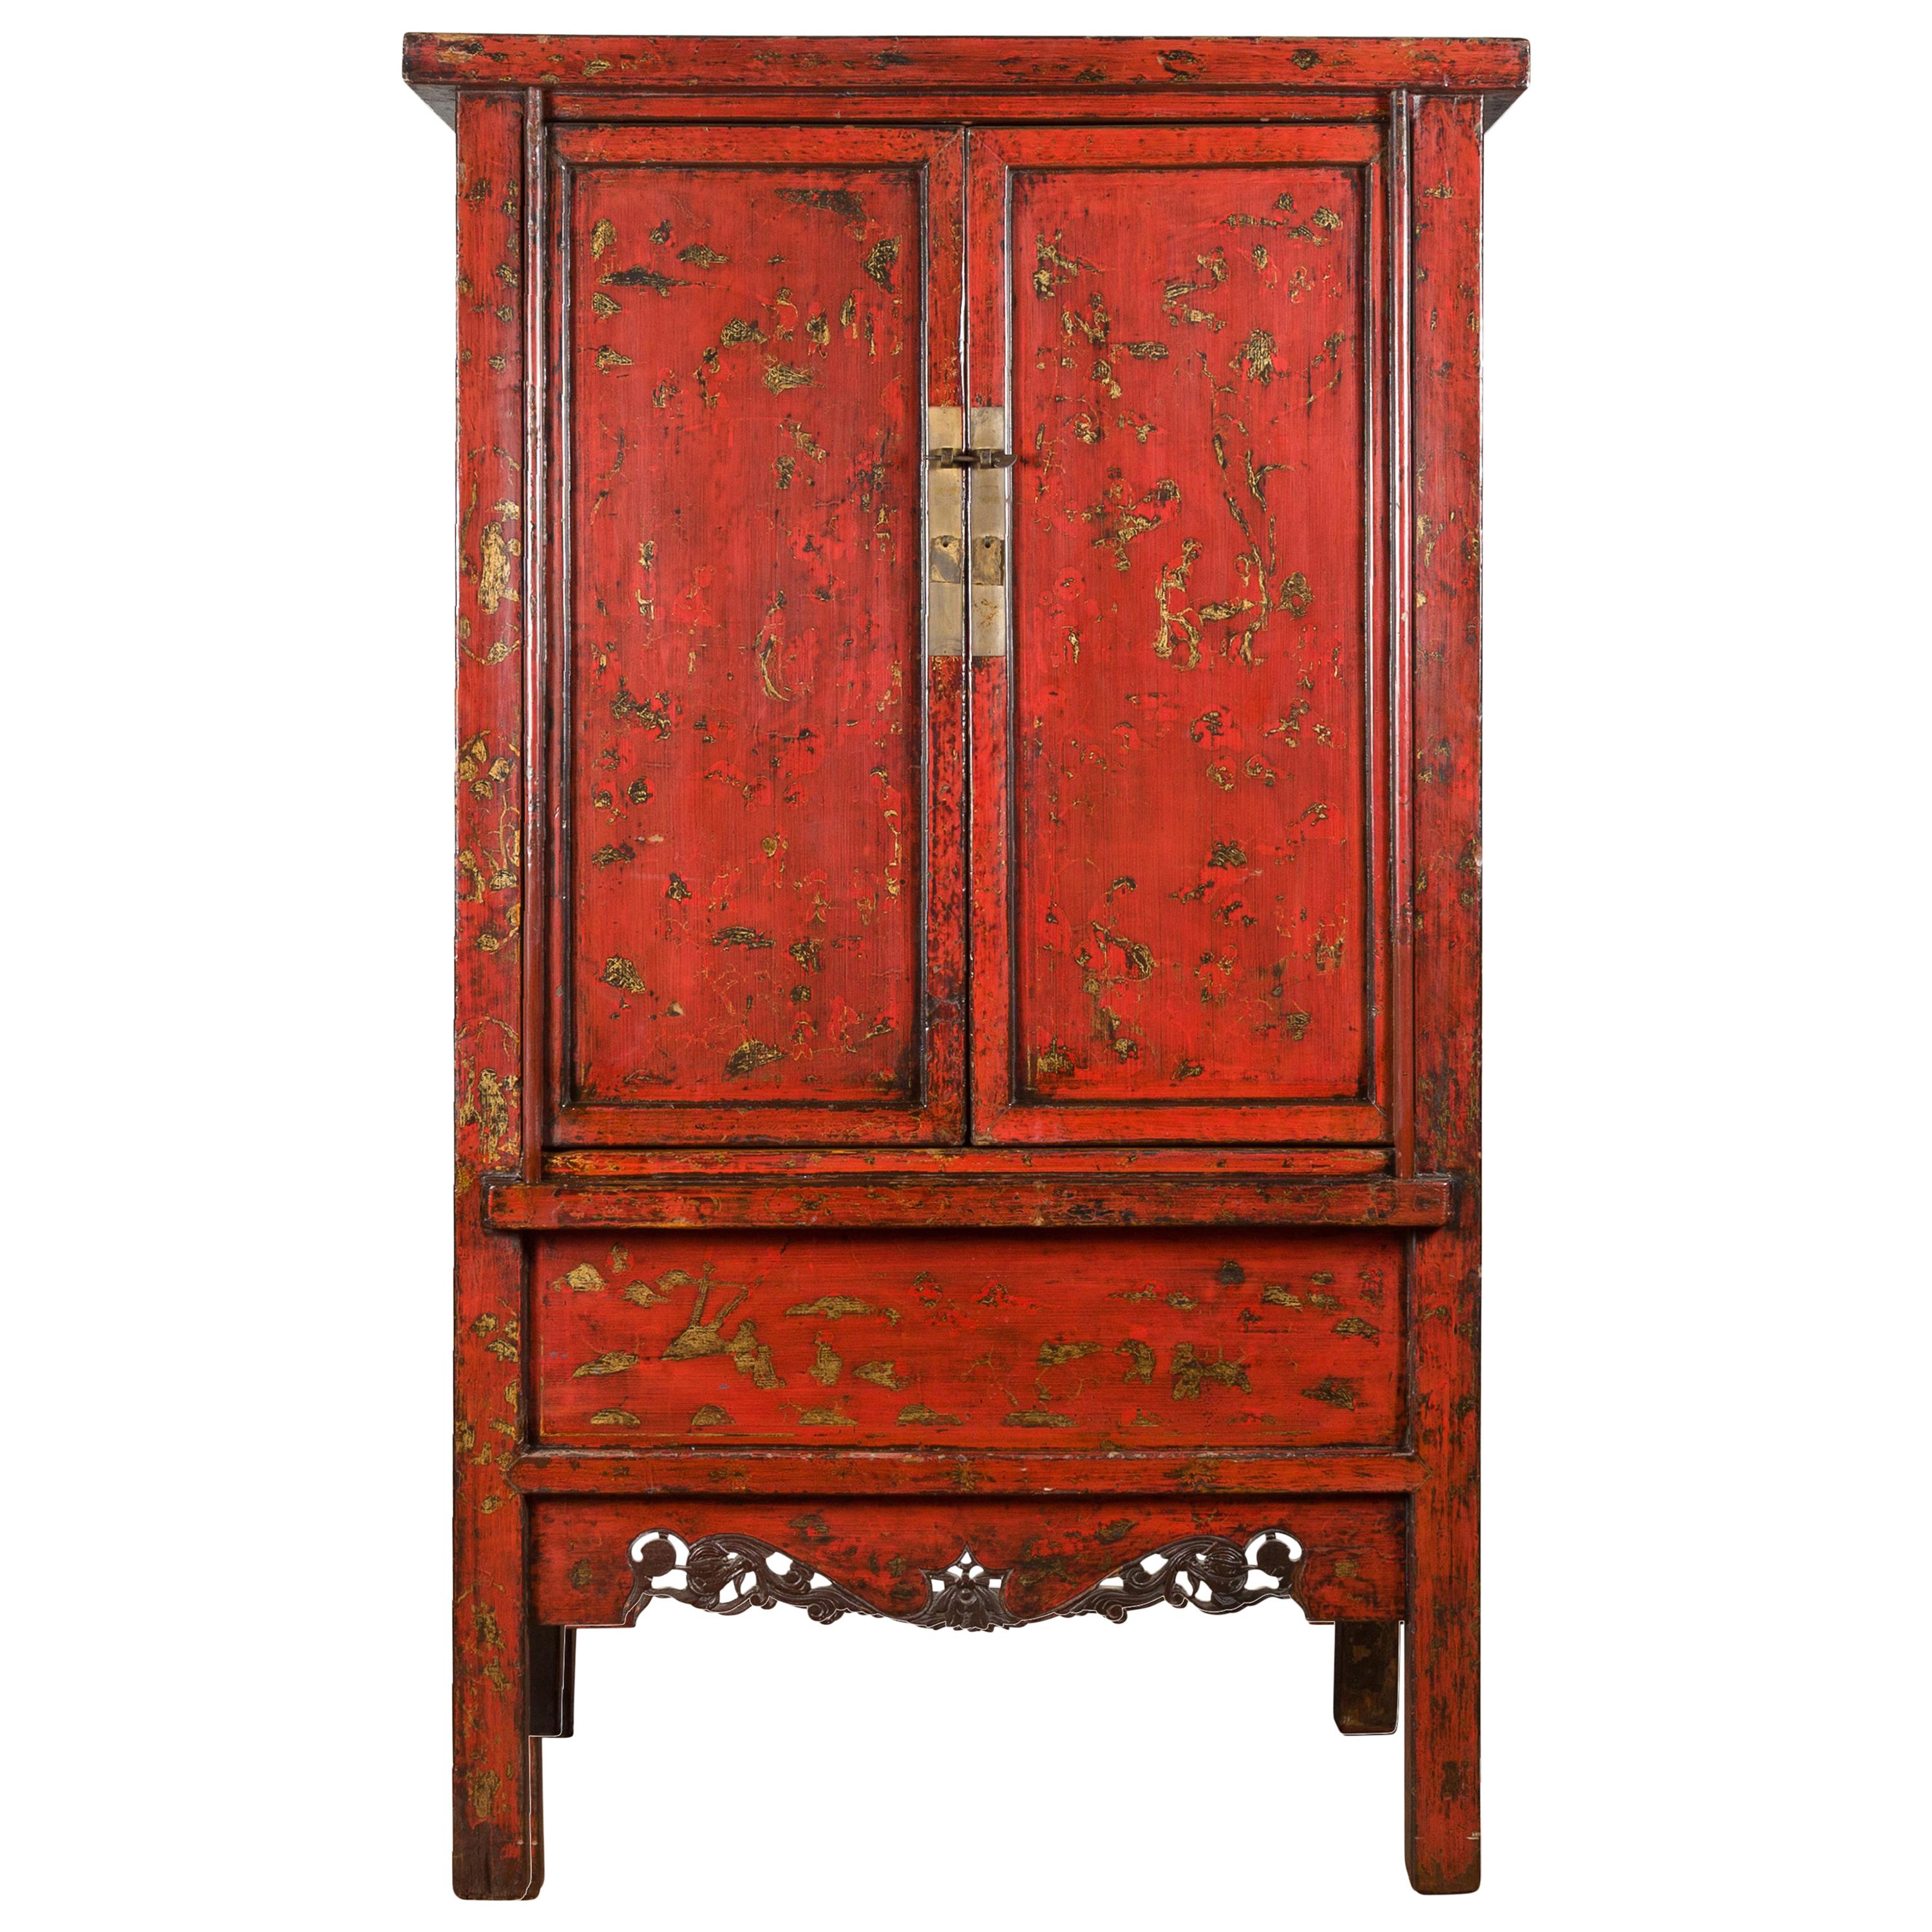 Chinese Qing Dynasty Style Red Lacquer Cabinet with Gilt Chinoiserie Decor